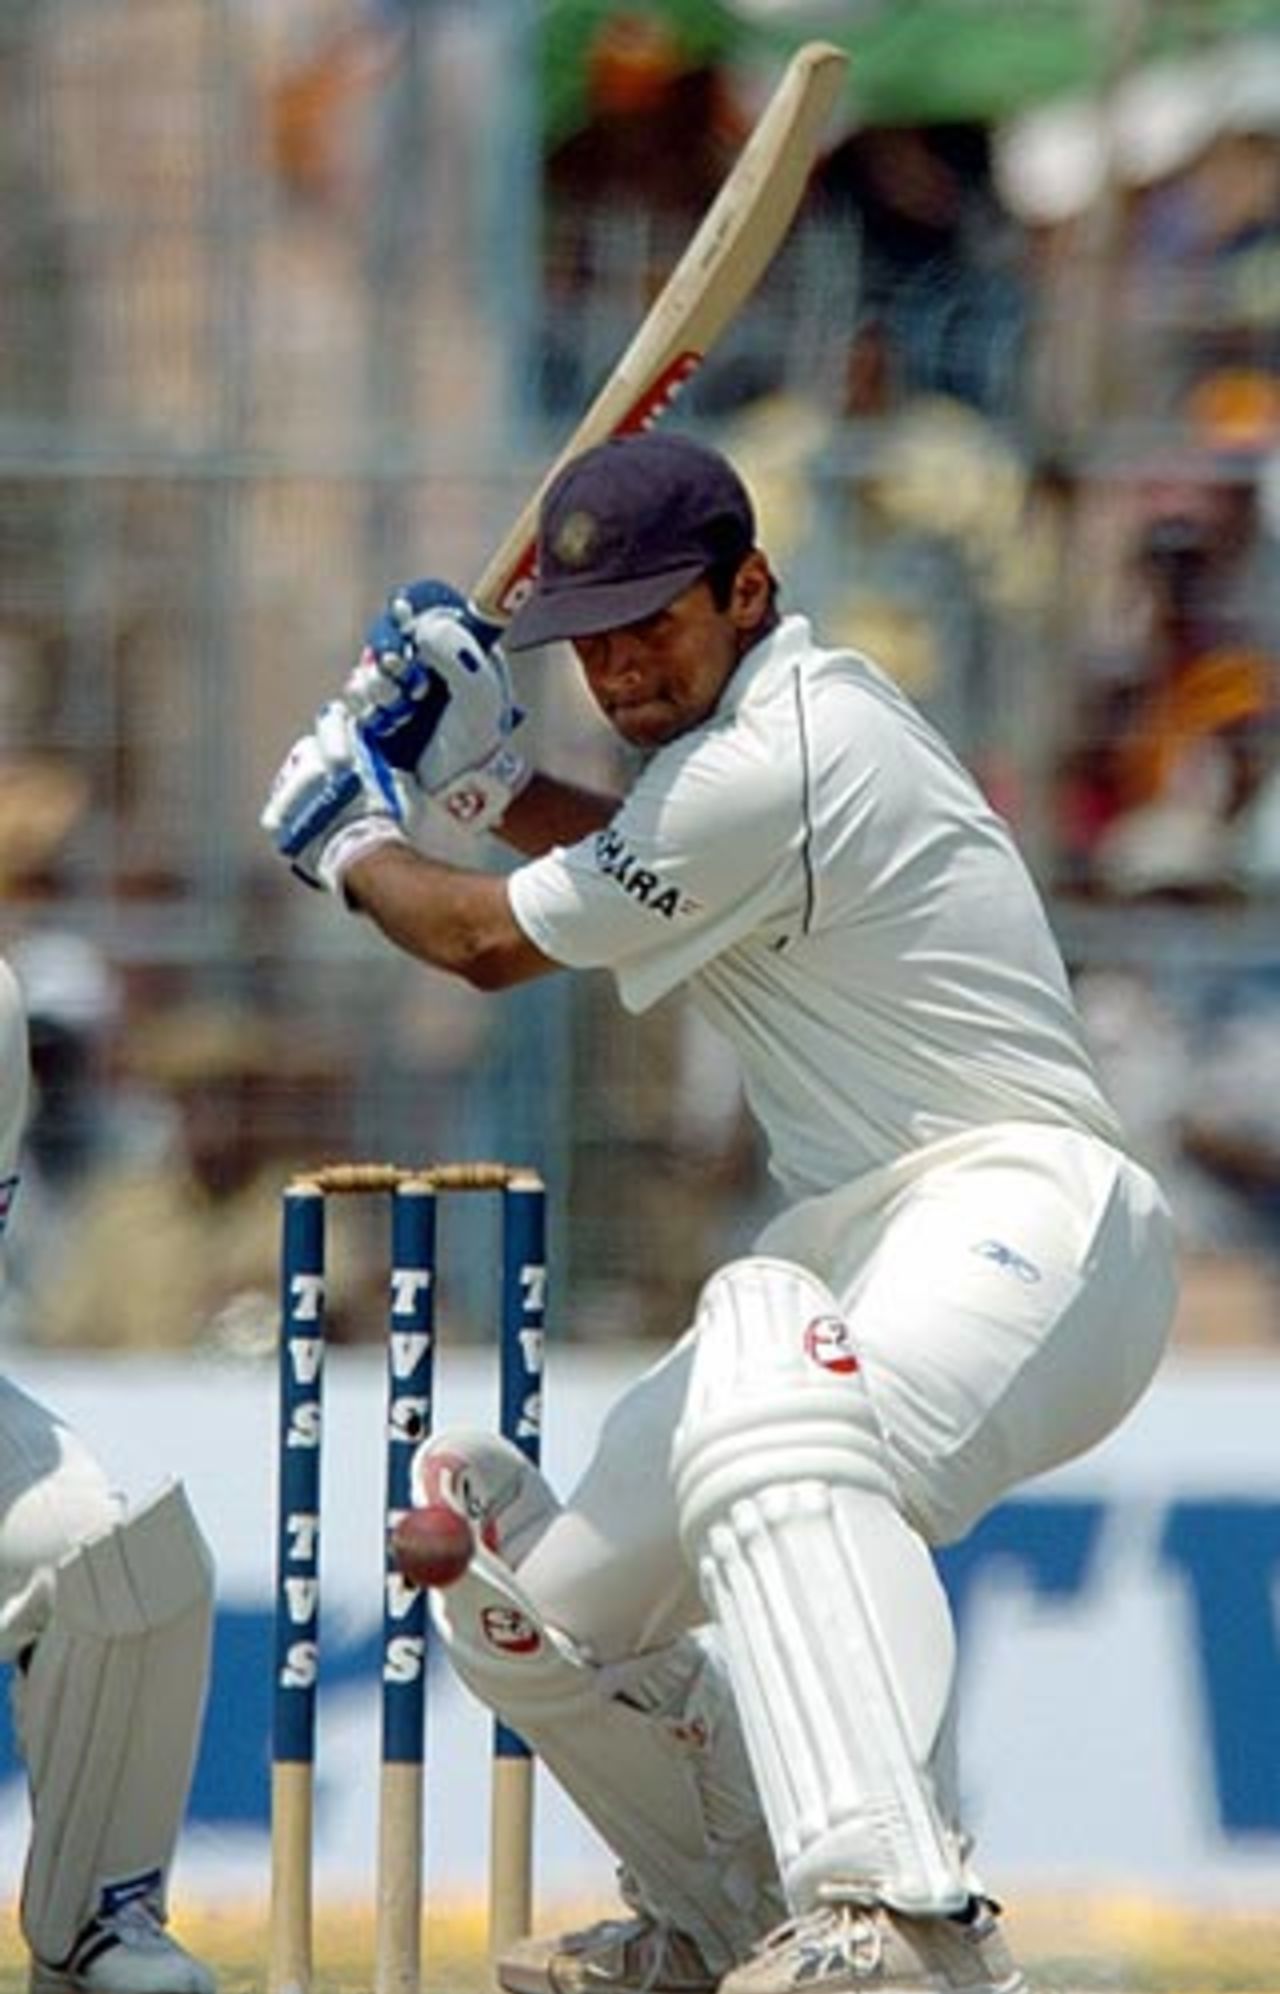 Rahul Dravid was cautious after Laxman's retirement, but gradually opened up to reach his second hundred of the game, India v Pakistan, 2nd Test, Kolkata, March 19, 2005